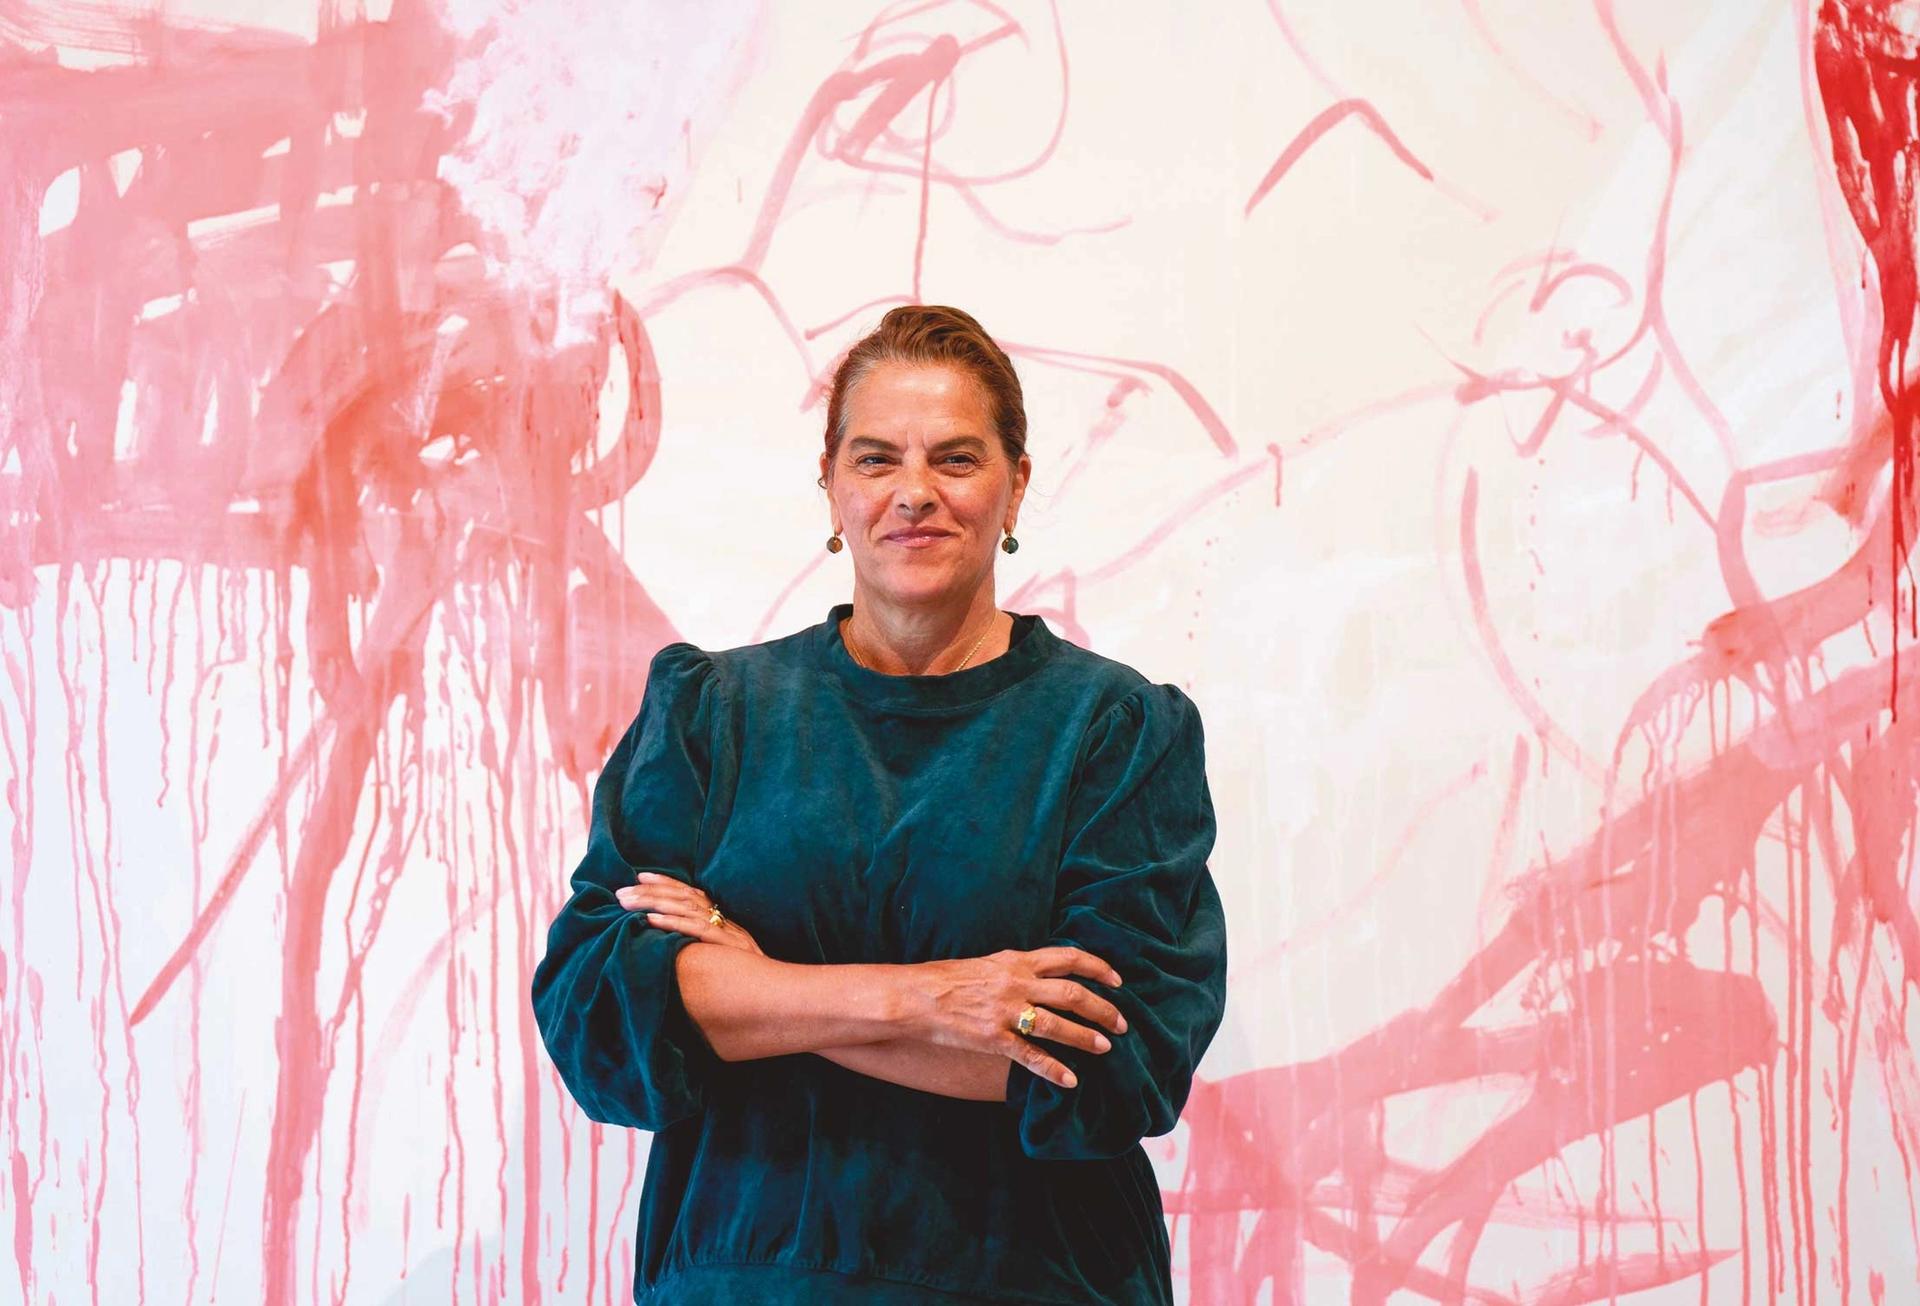 Tracey Emin has supported causes including Aids/HIV, violence against women and homelessness Photo: PA Images/Alamy Stock Photo



